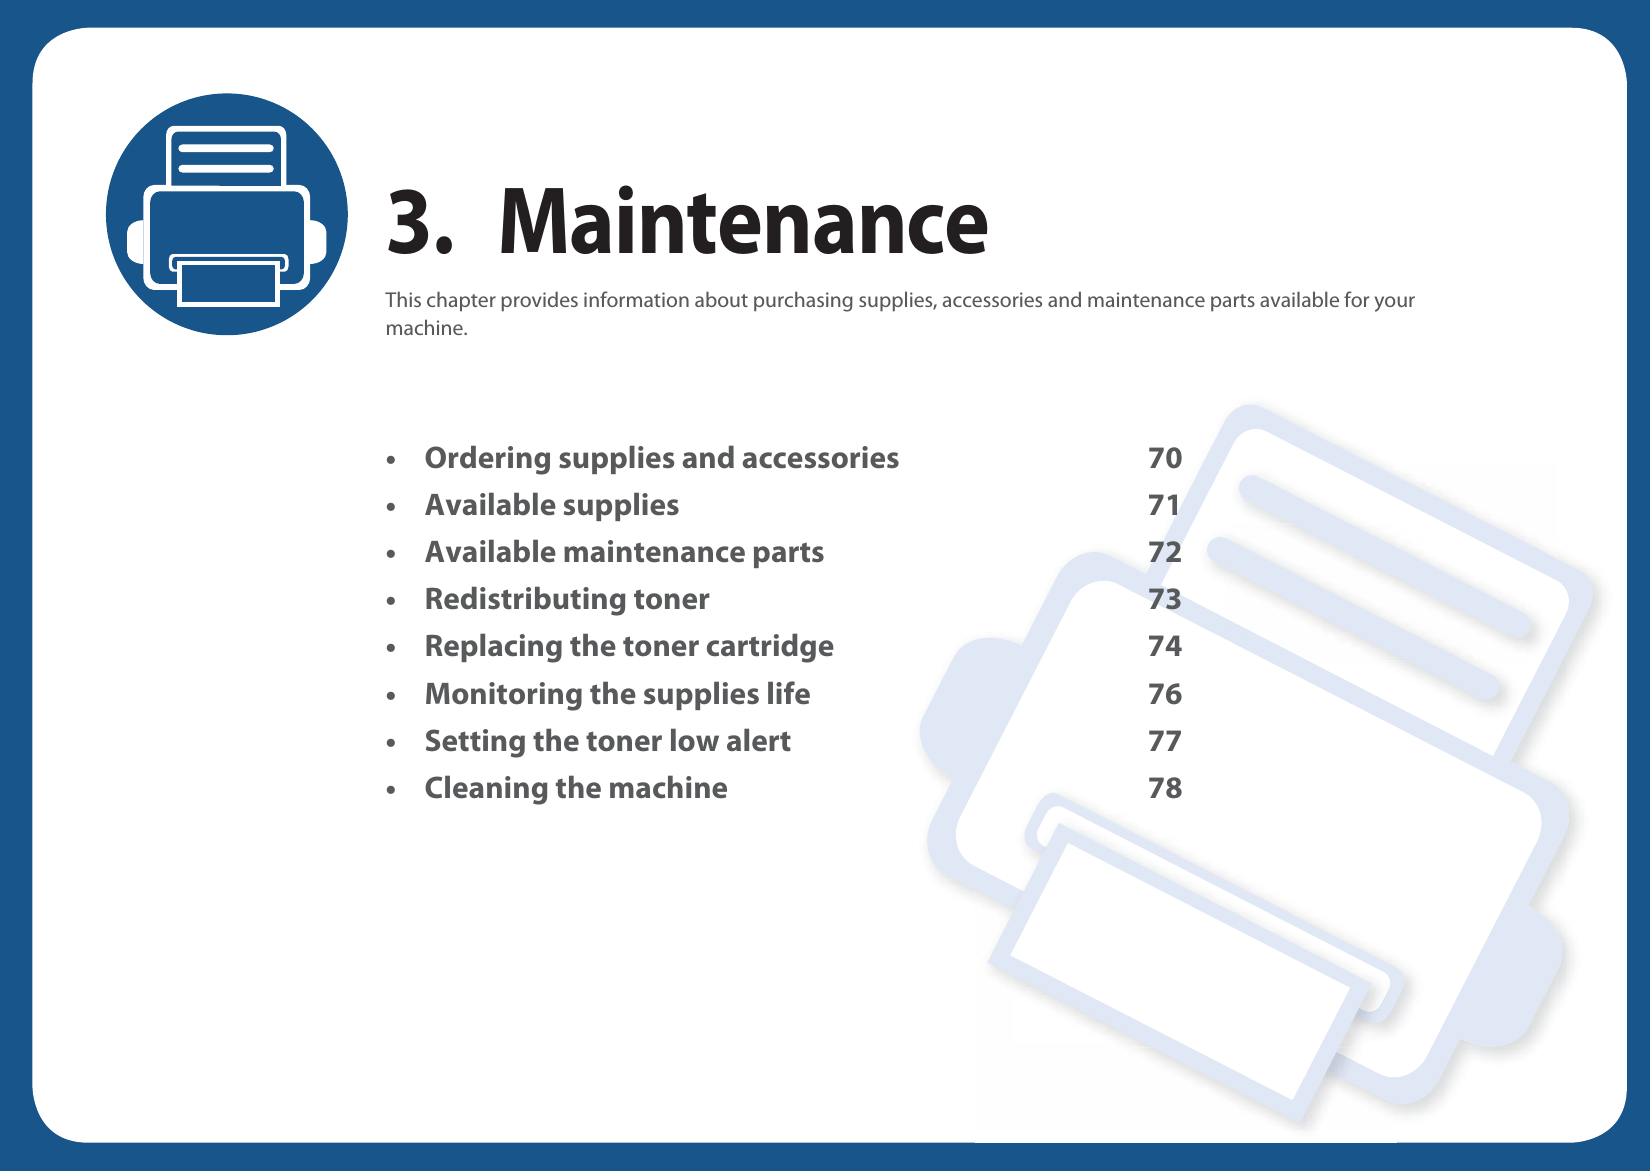 3. MaintenanceThis chapter provides information about purchasing supplies, accessories and maintenance parts available for your machine.• Ordering supplies and accessories 70• Available supplies 71• Available maintenance parts 72• Redistributing toner 73• Replacing the toner cartridge 74• Monitoring the supplies life 76• Setting the toner low alert 77• Cleaning the machine 78